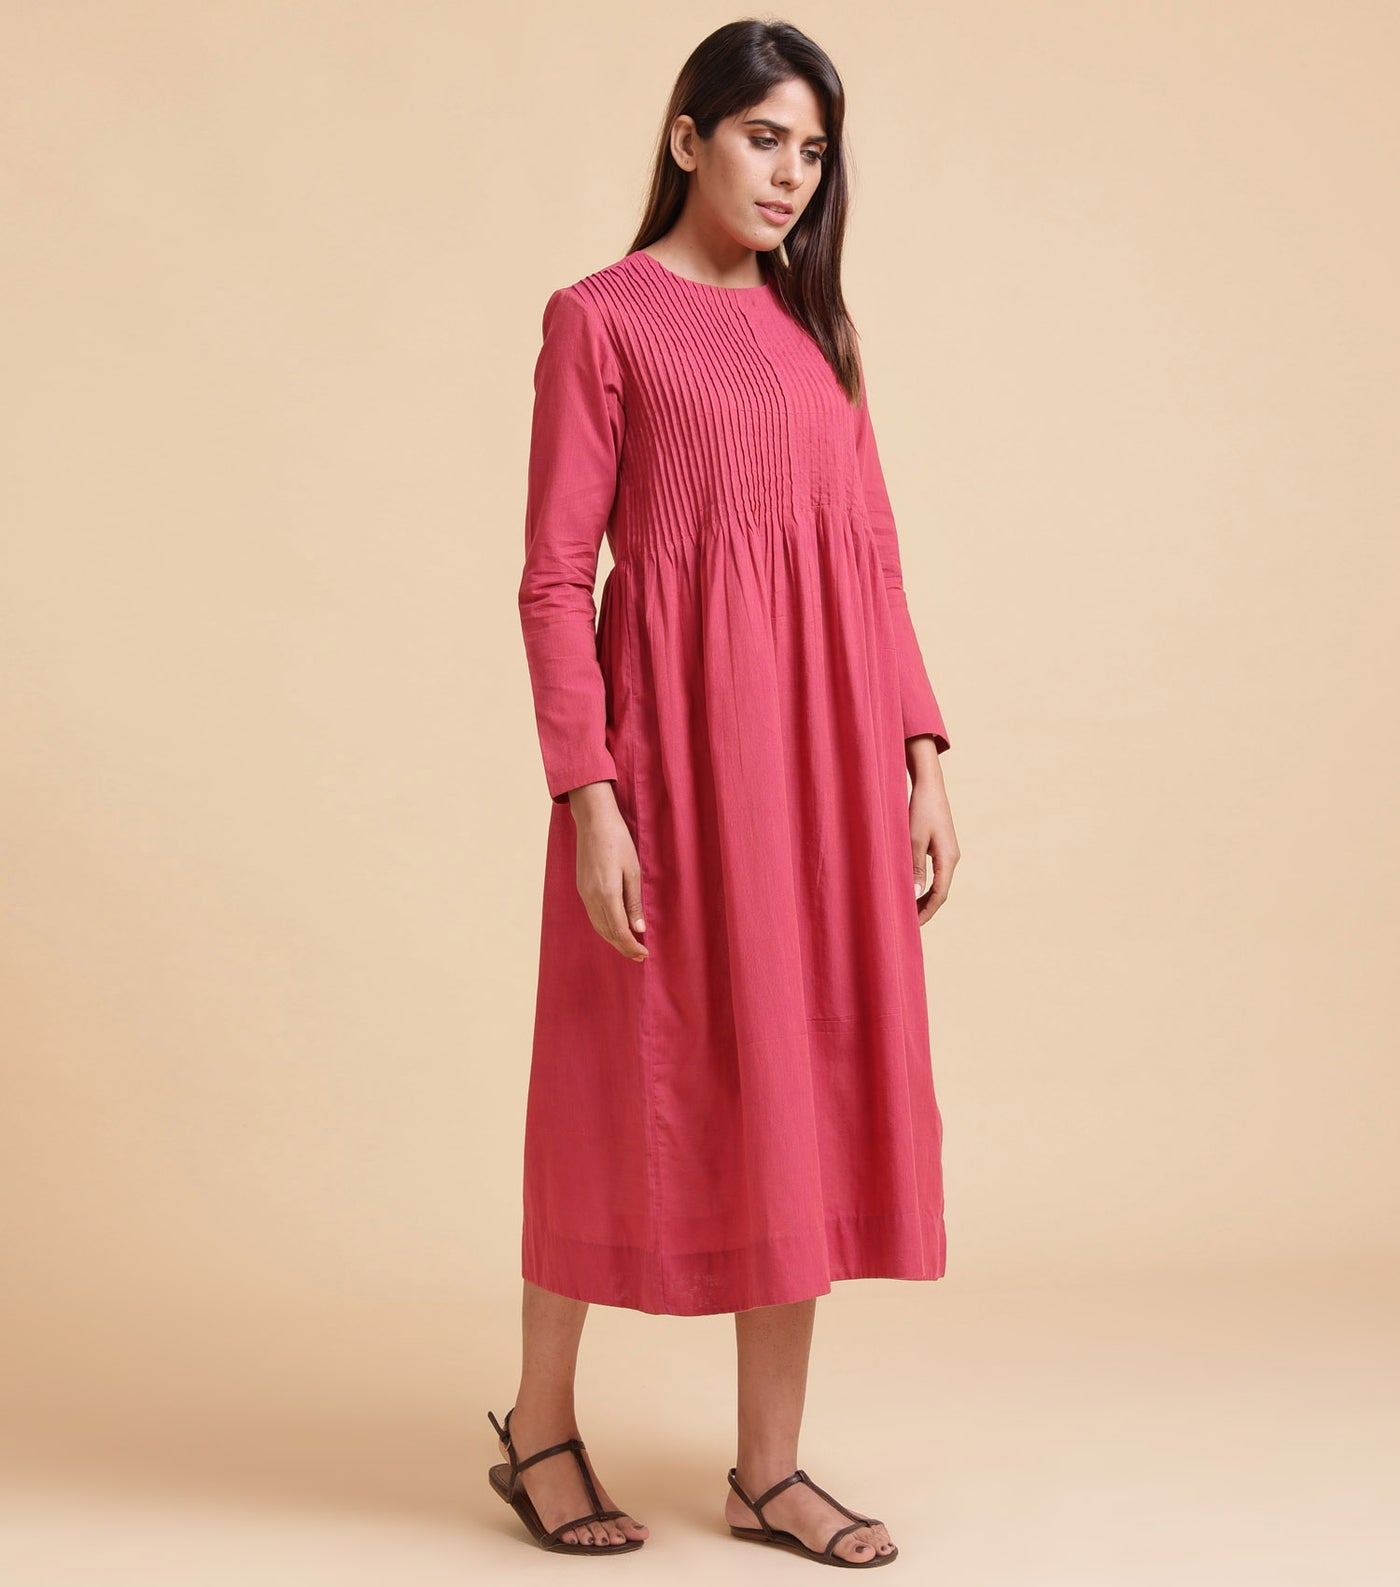 Pink pleated cotton dress